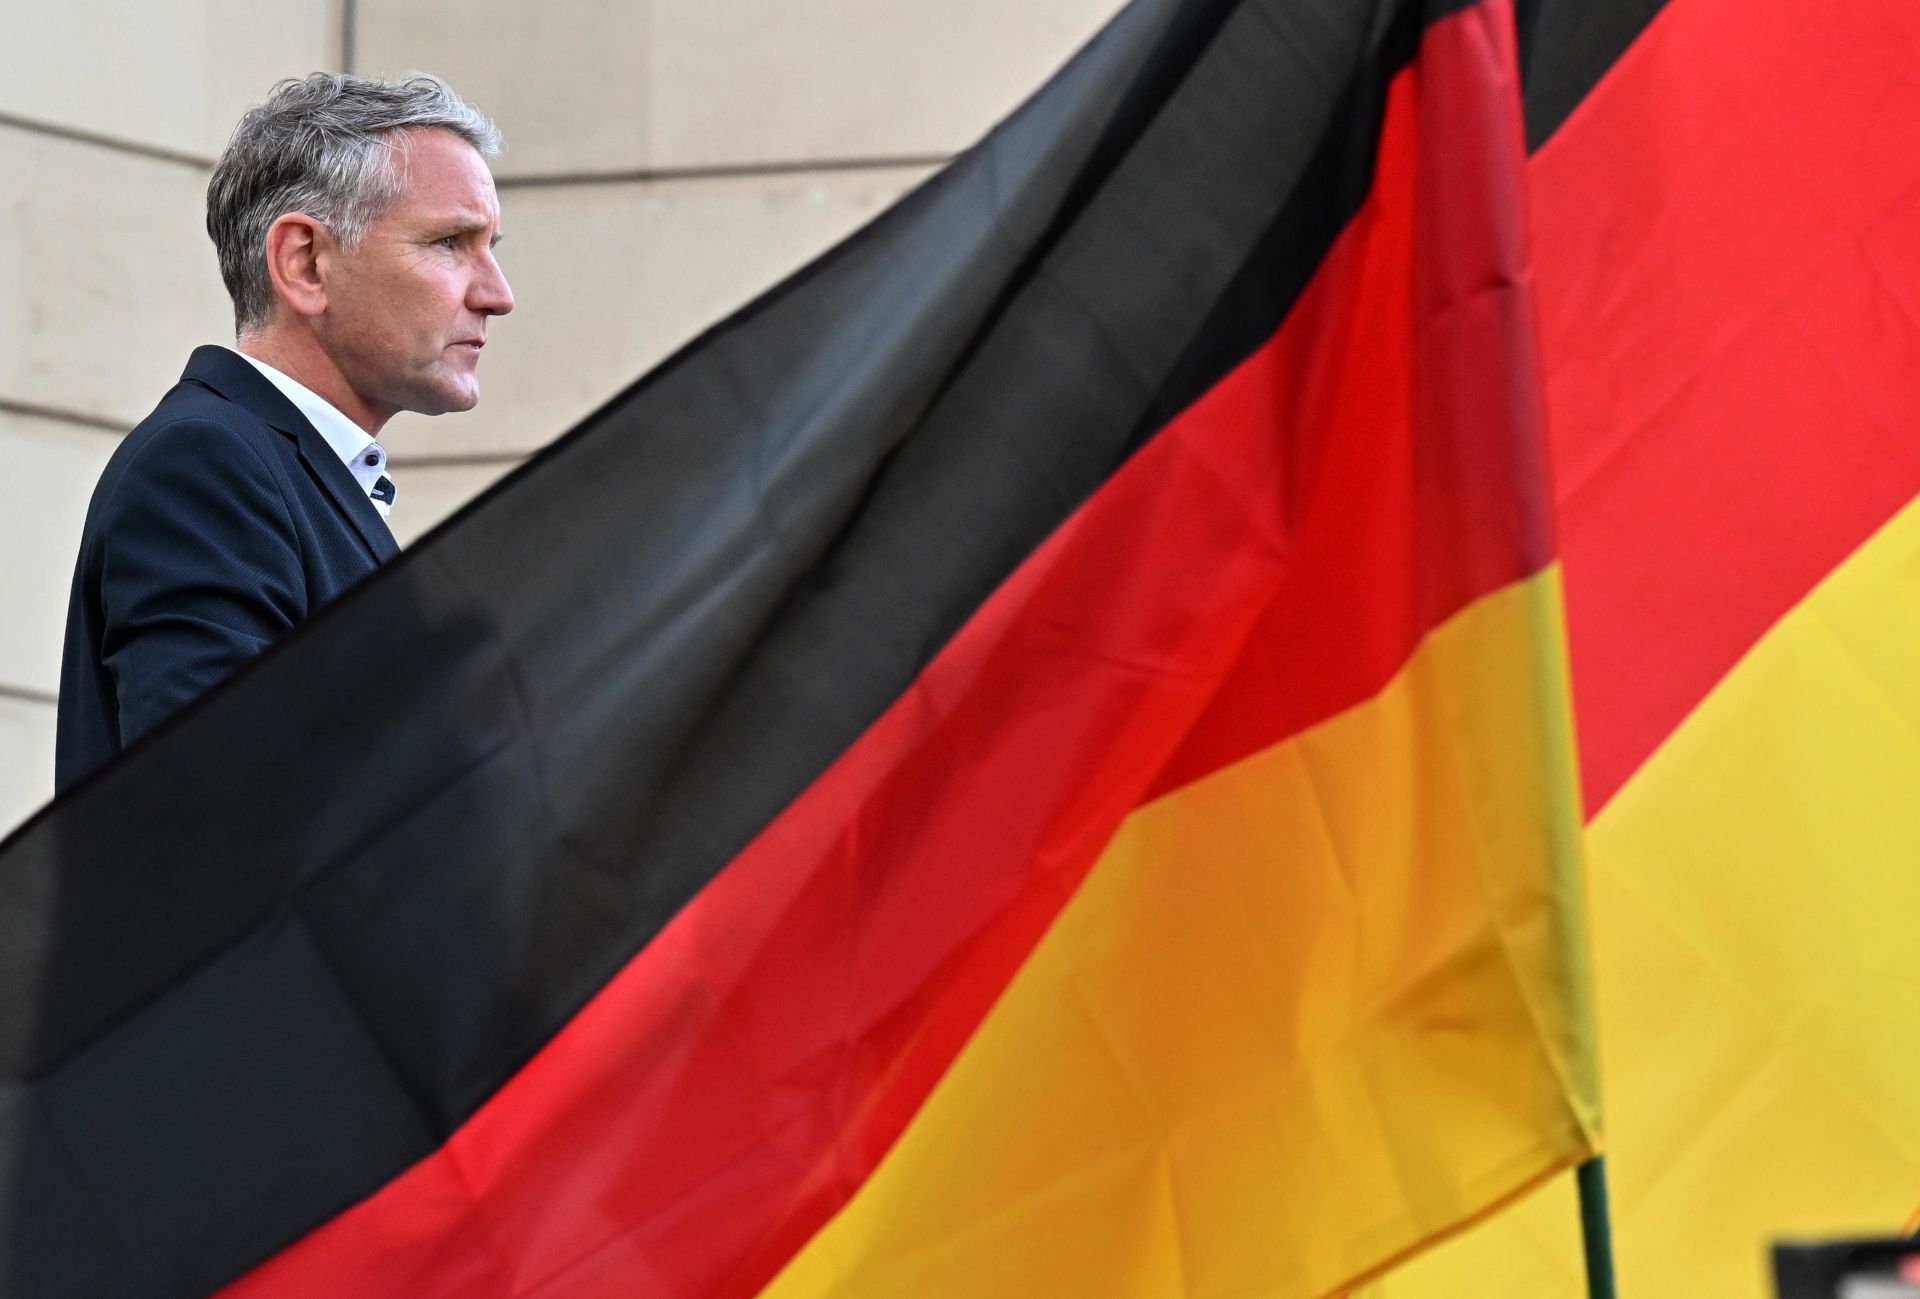 The Right’s Resurgence in Eastern Germany